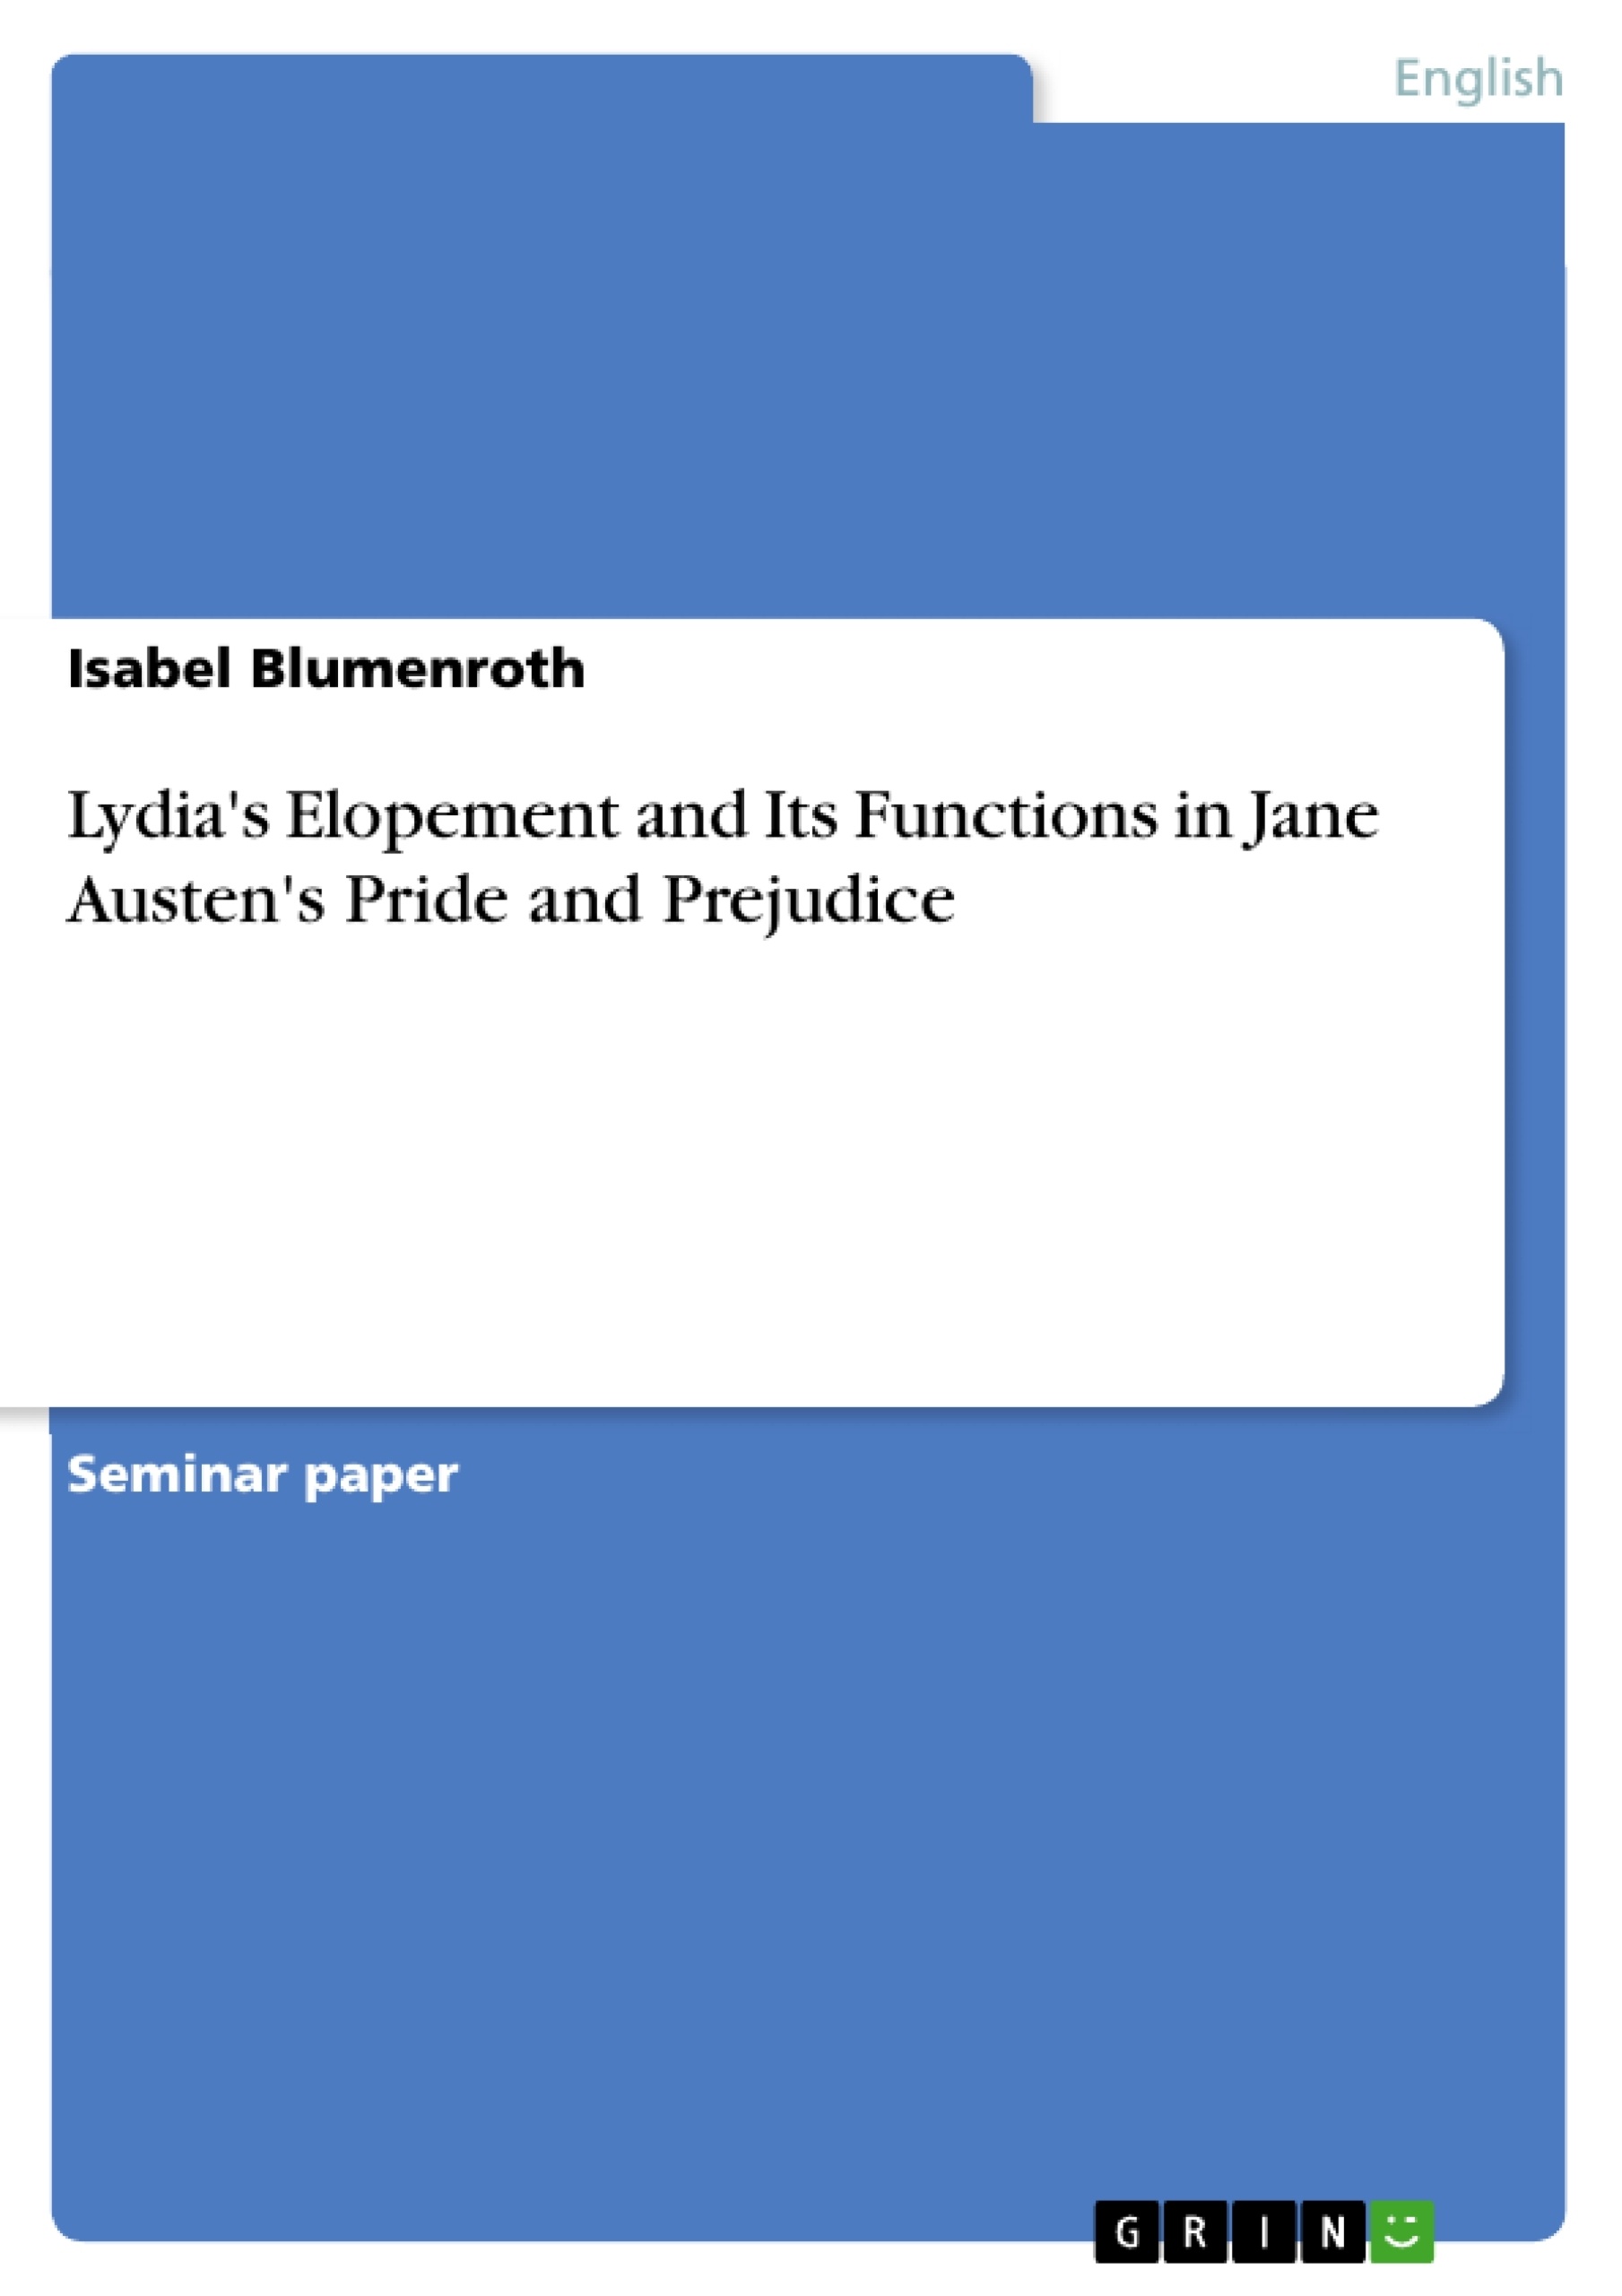 Title: Lydia's Elopement and Its Functions in Jane Austen's Pride and Prejudice